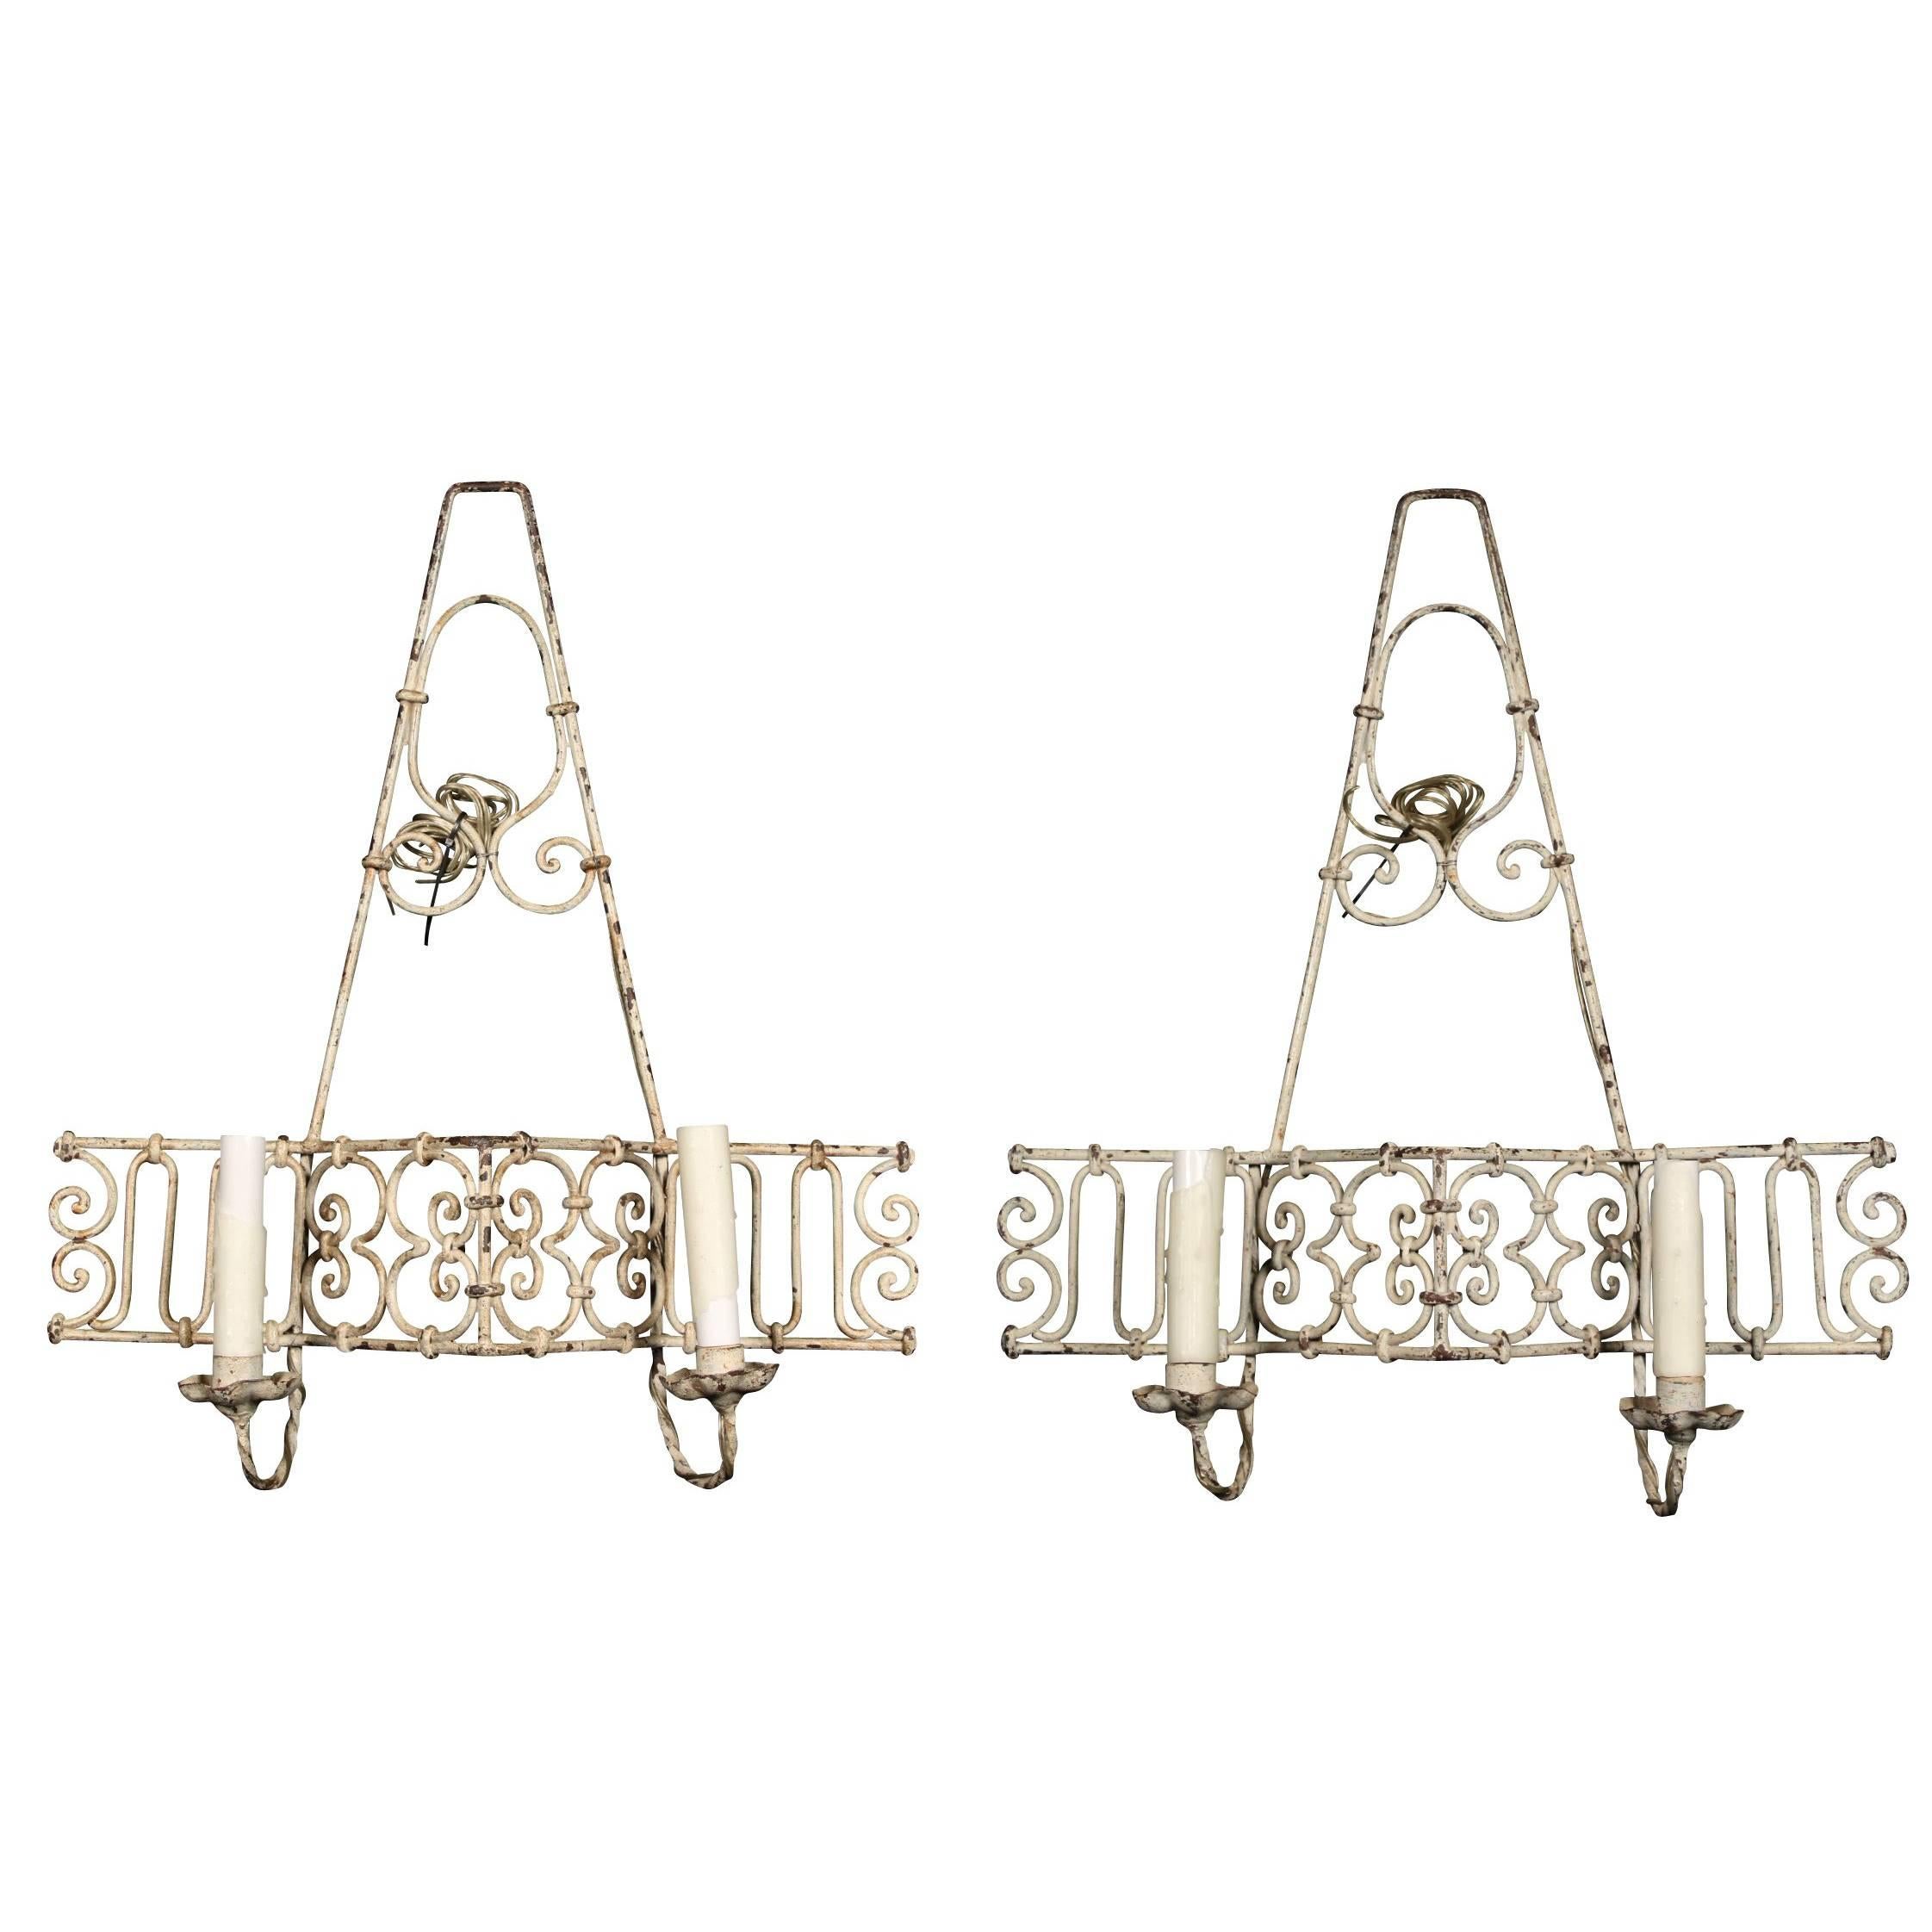 Pair of Hand-Wrought Iron Sconces